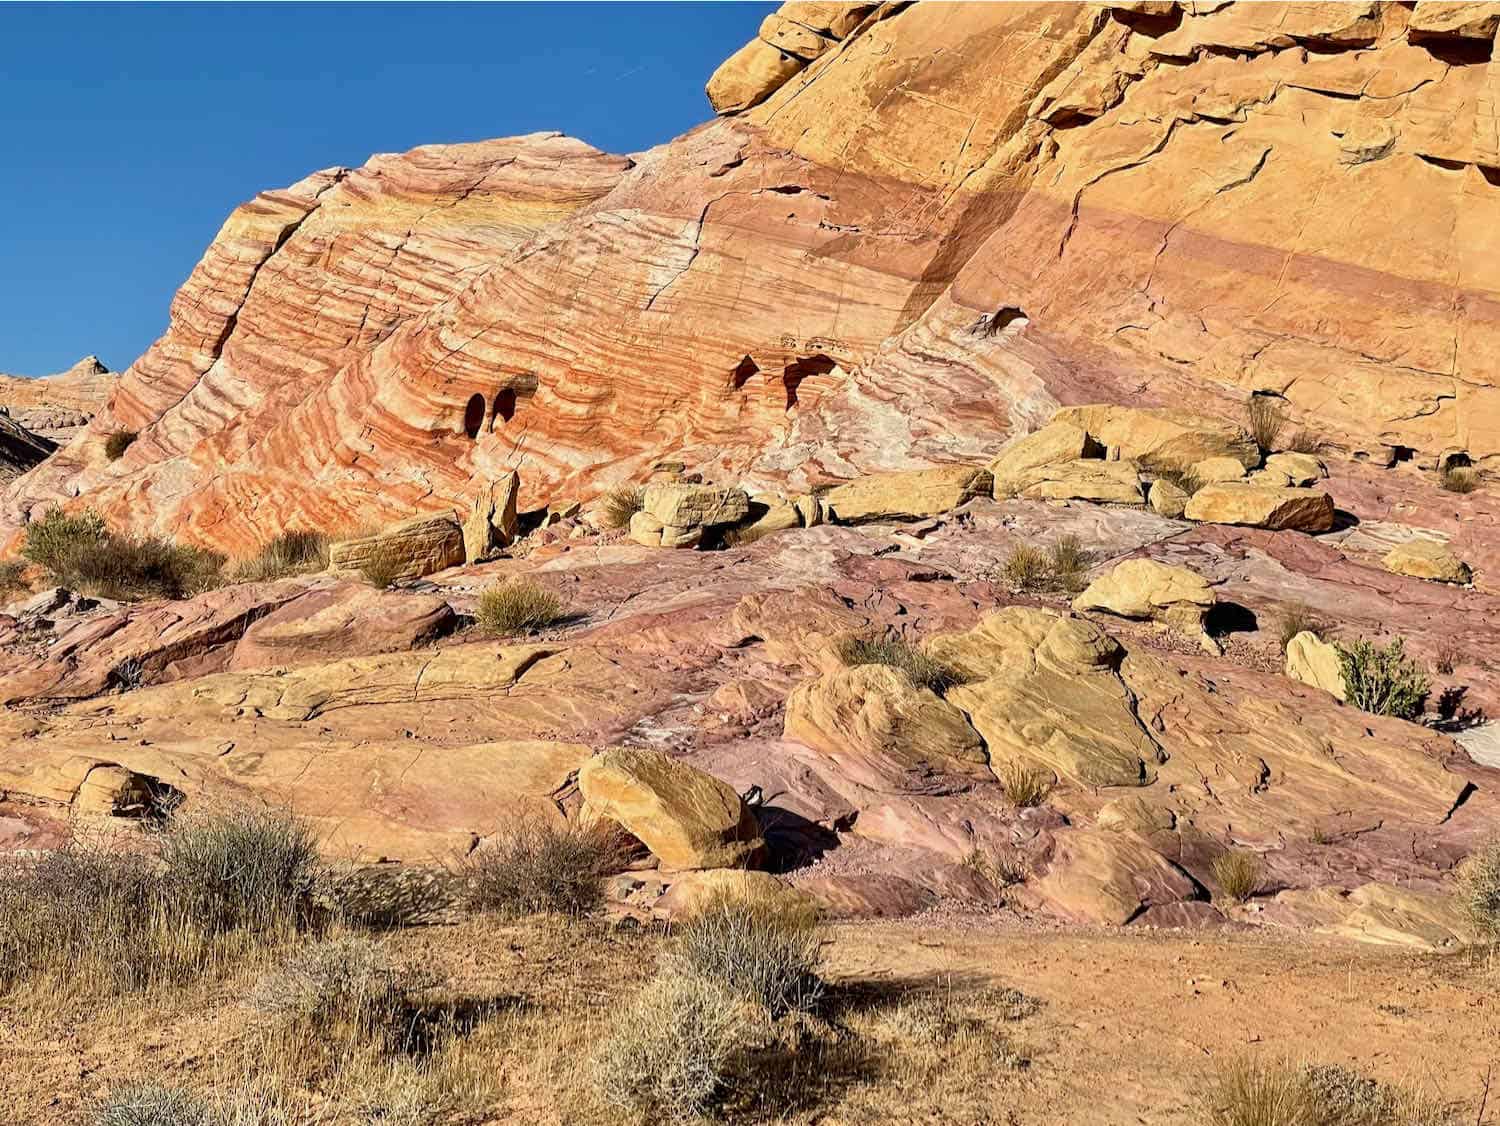 Yellow and red rocks combine to make the Rainbow Rocks formation in Valley of Fire State Park Nevada.